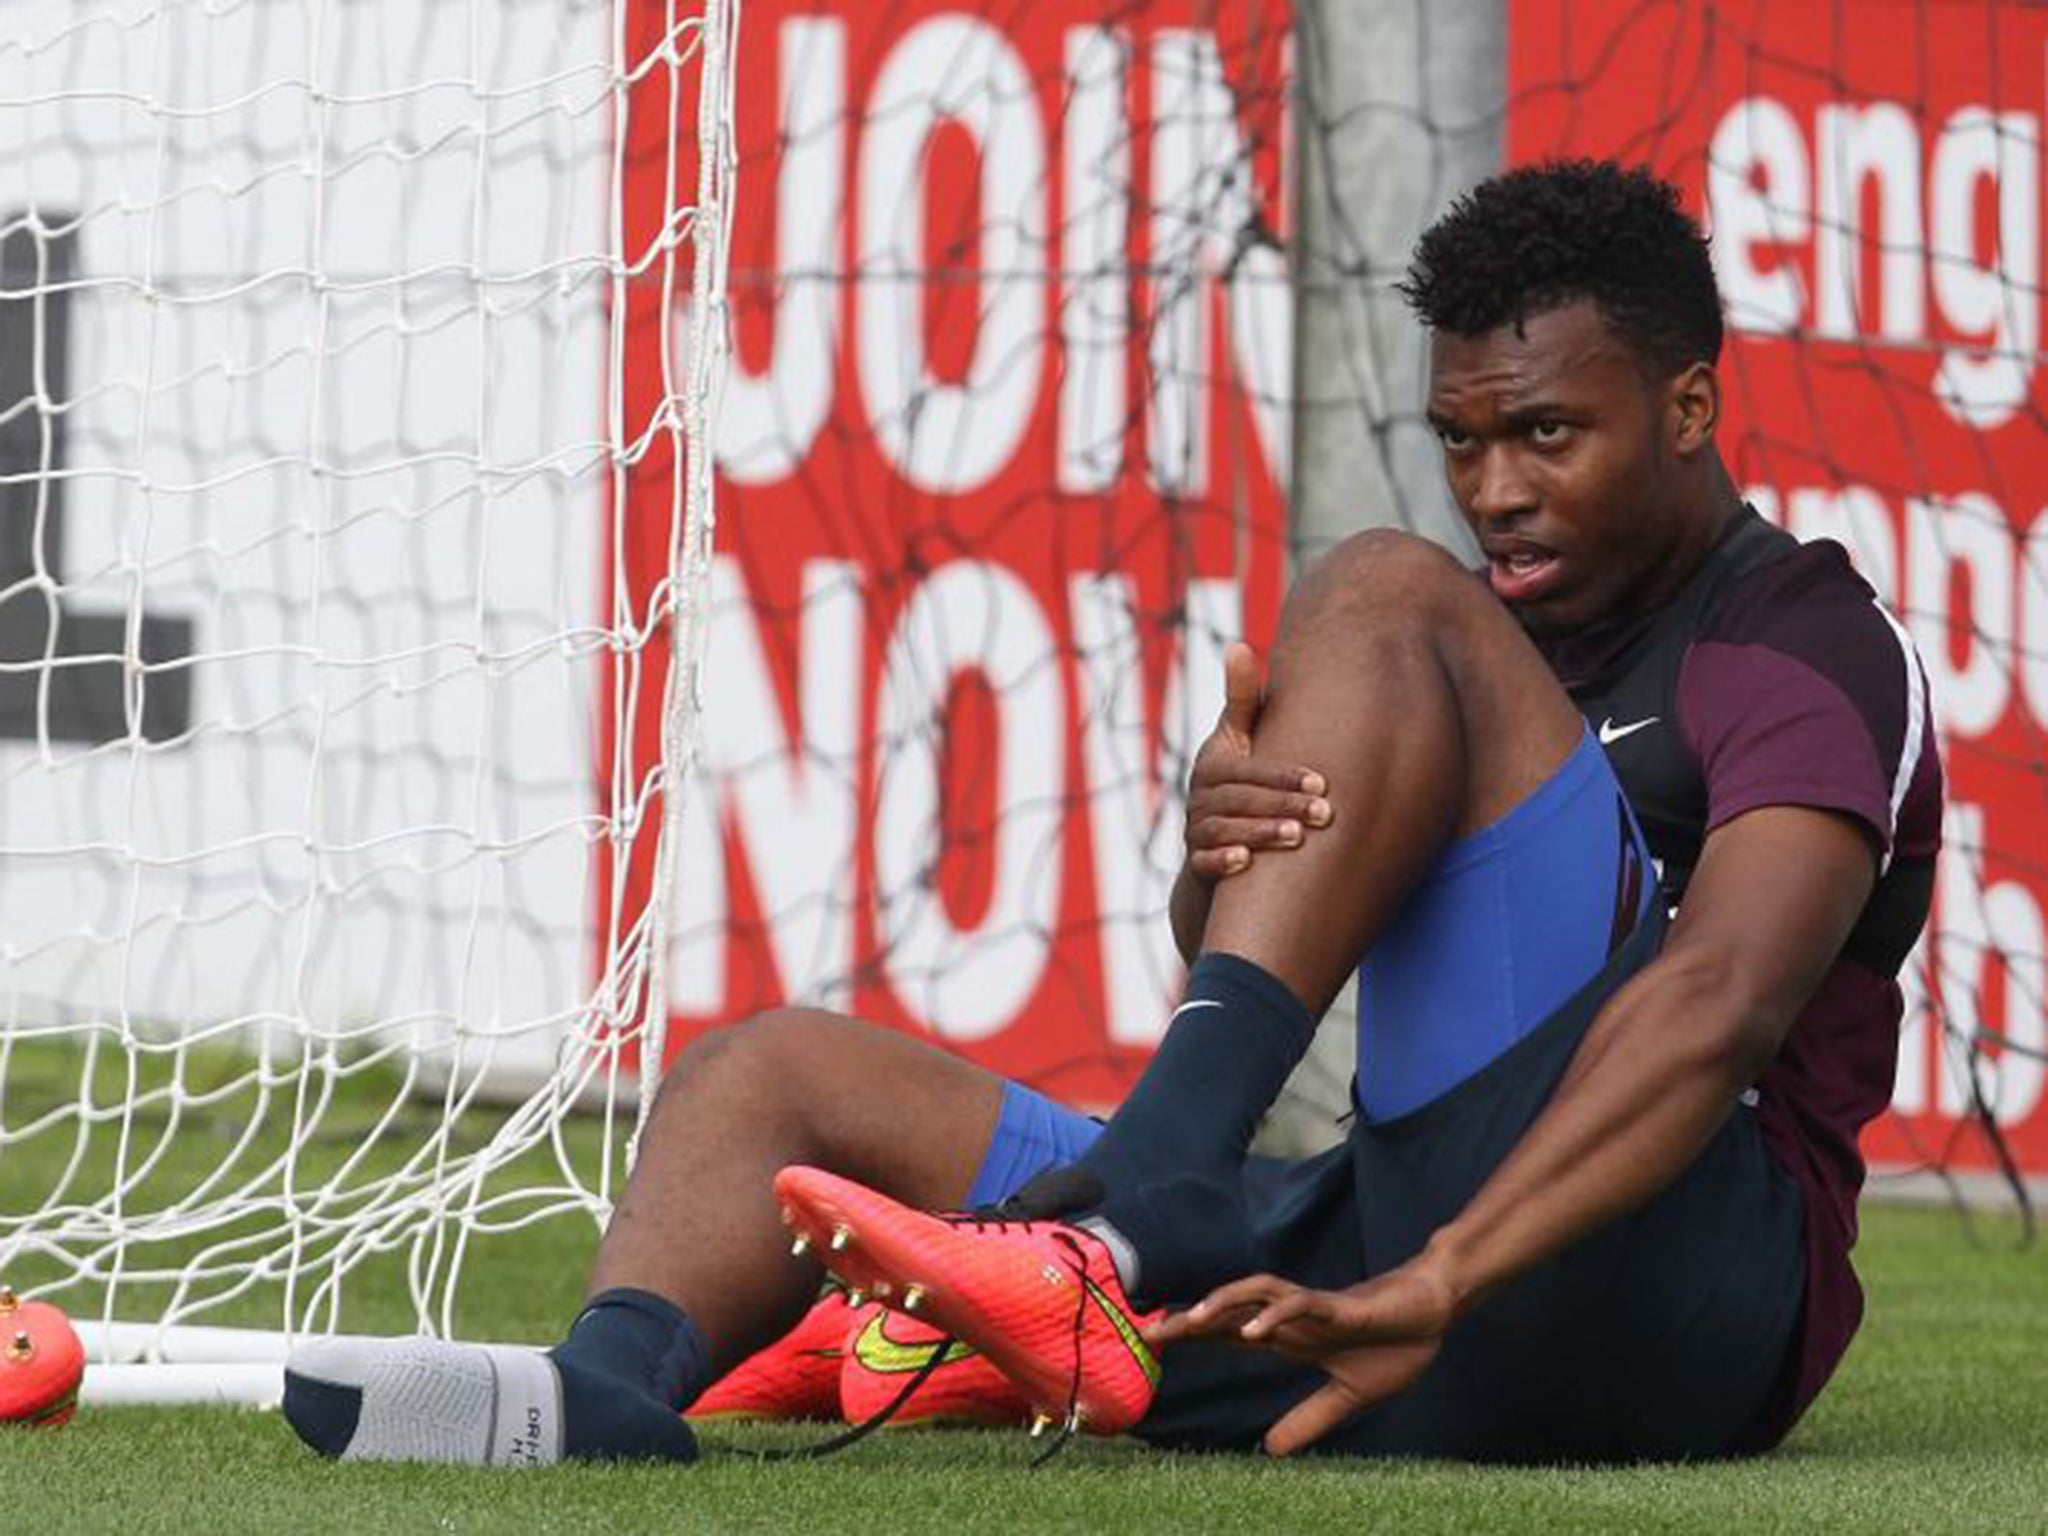 Despite picking up a hip injury in the defeat to Manchester United, Daniel Sturridge has still joined up with the England squad